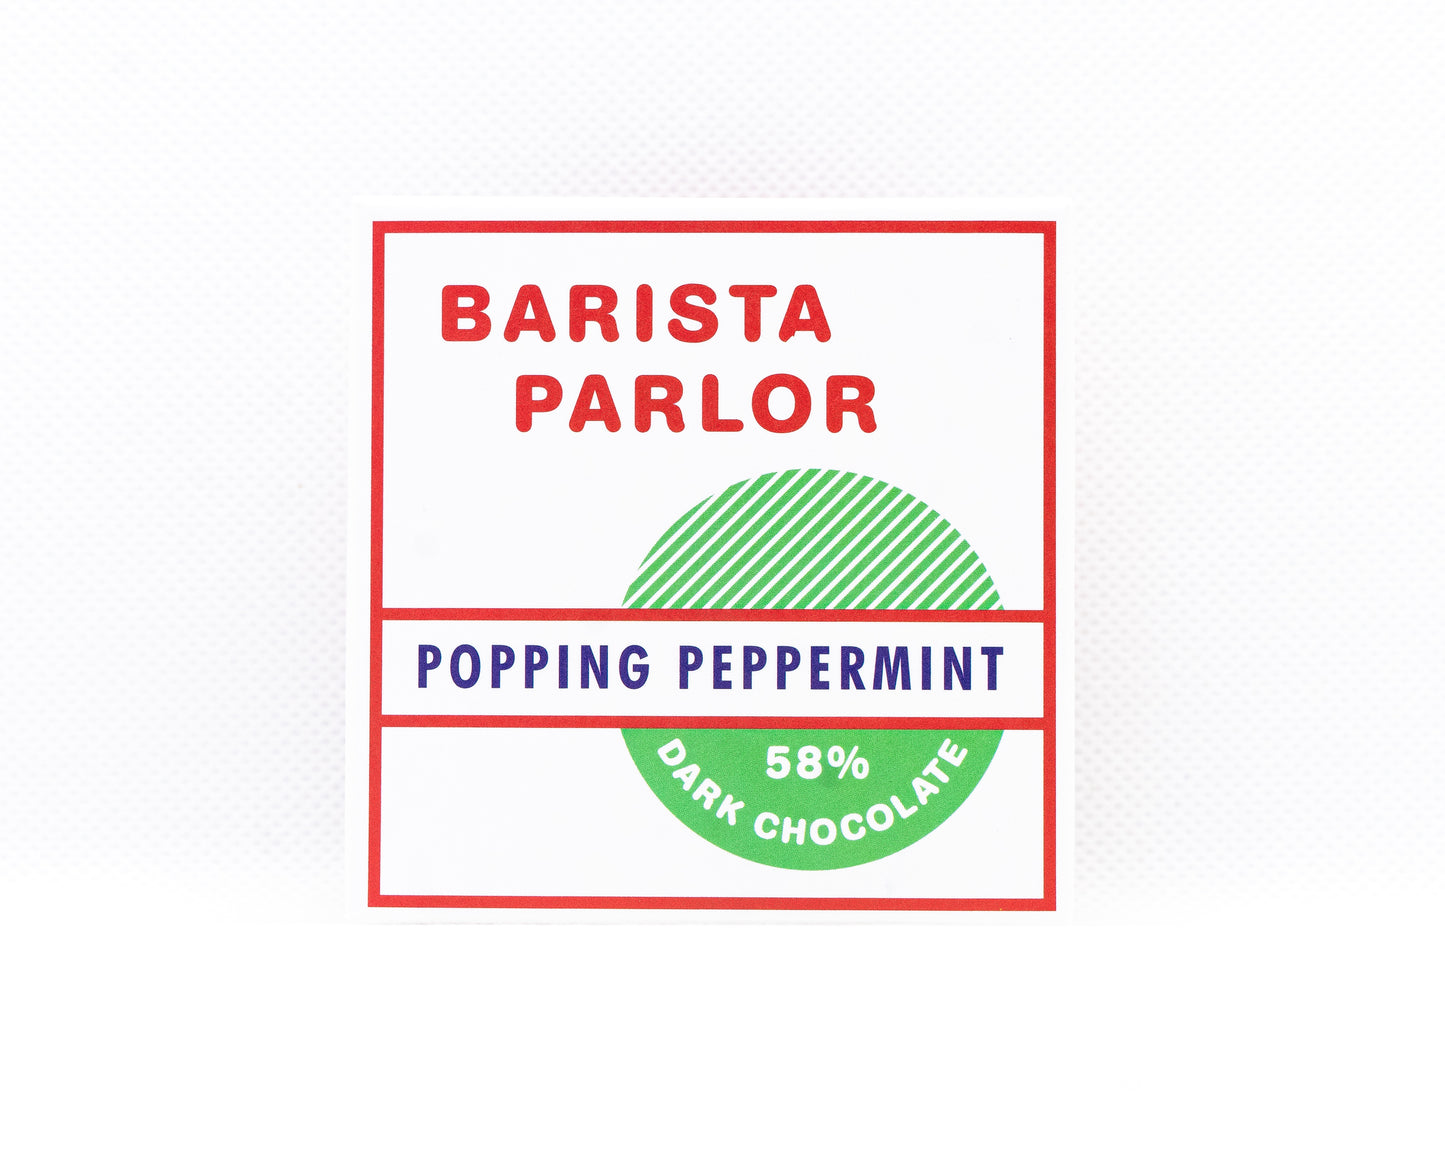 Popping Peppermint